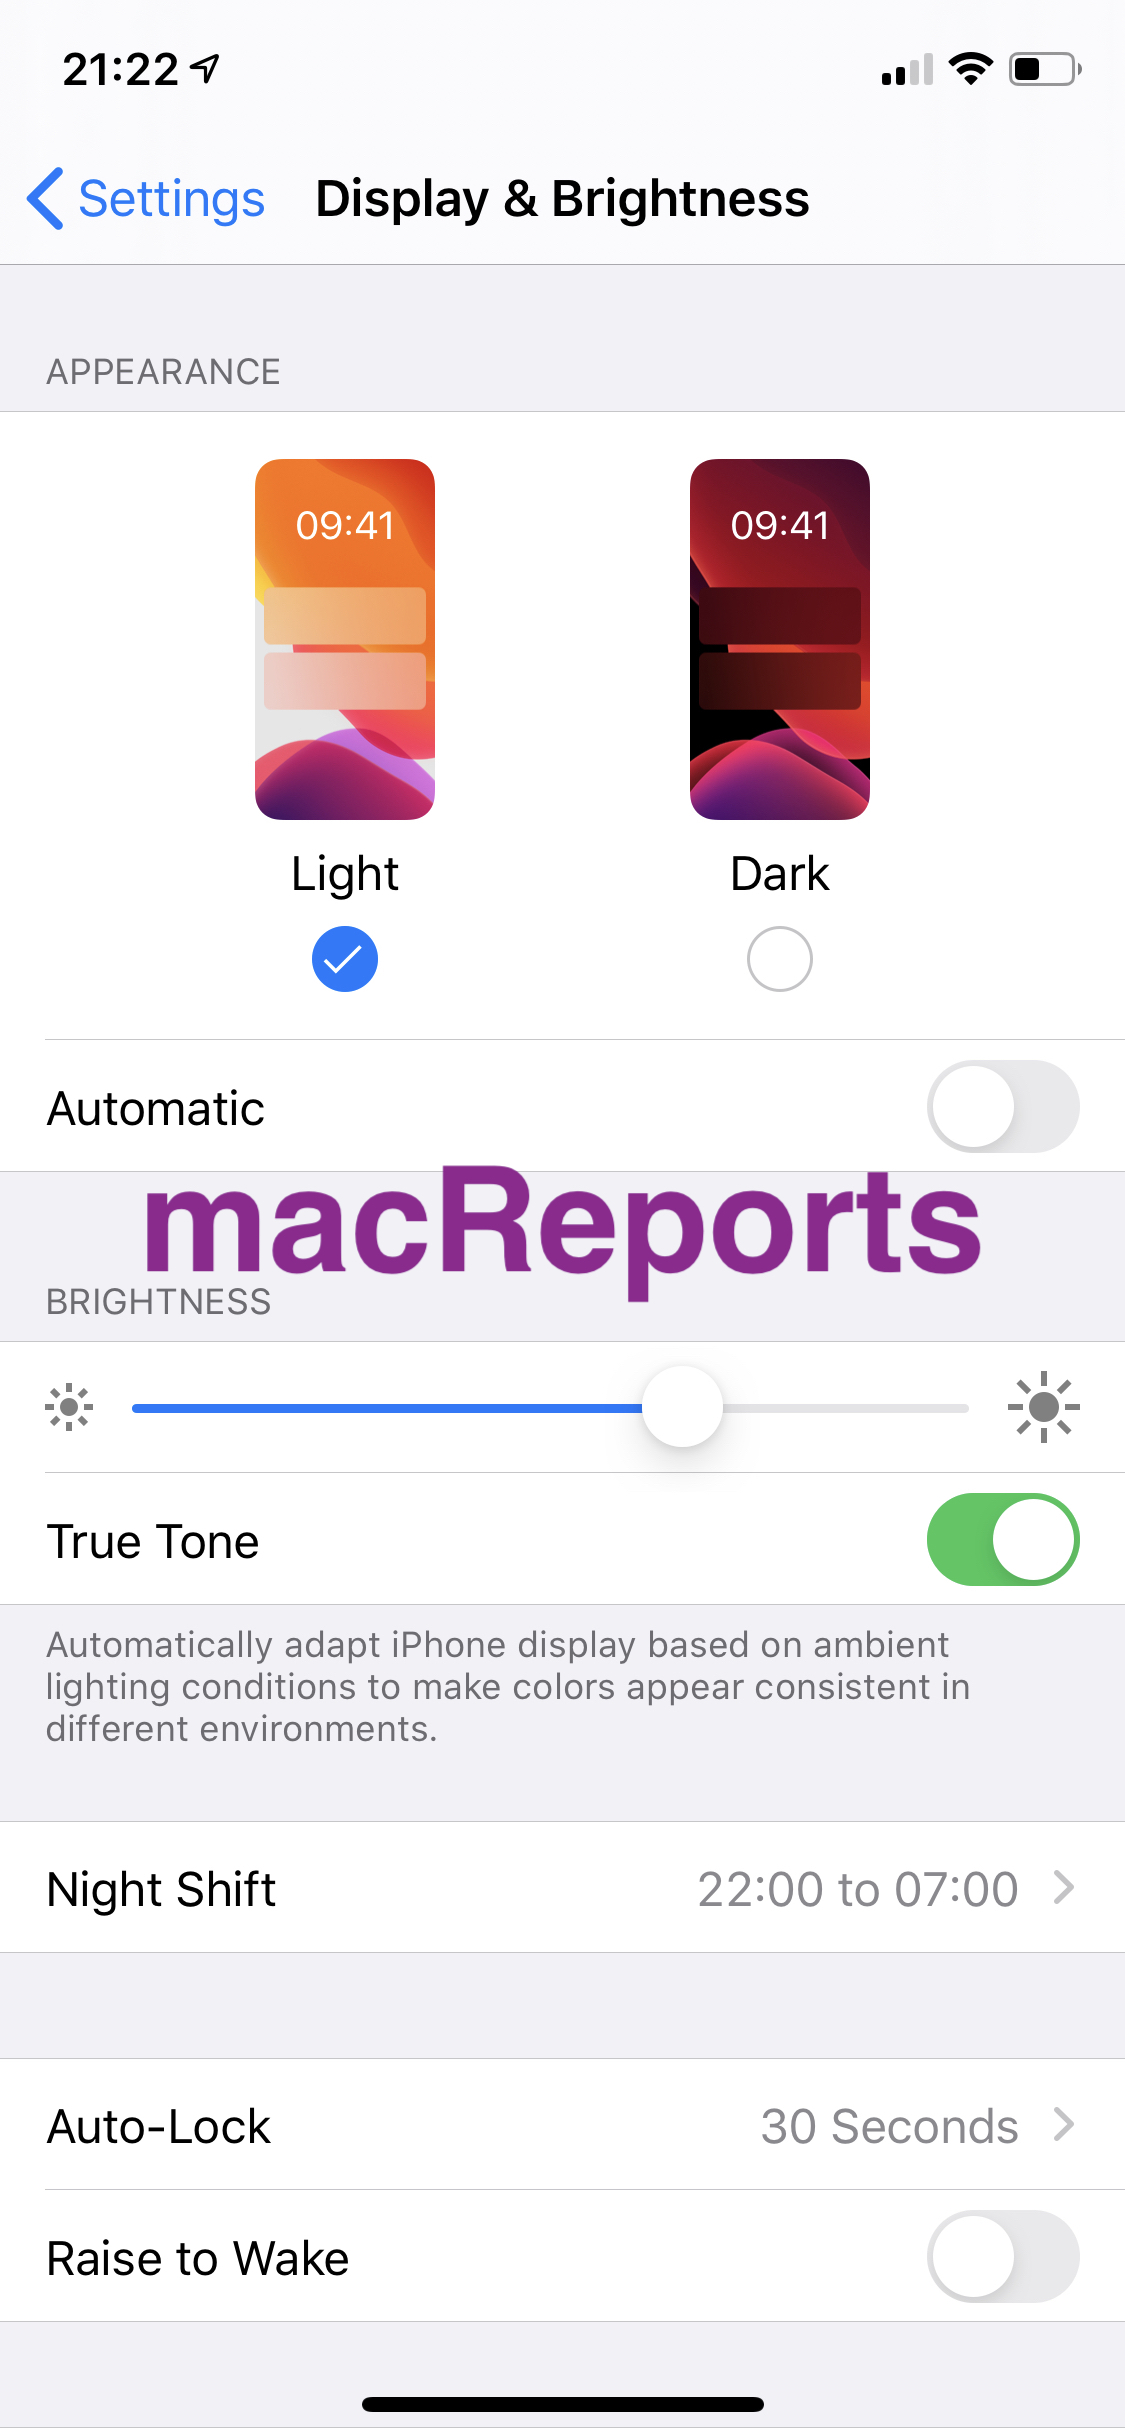 How To Turn On & Off Dark Mode in iOS, iPadOS and macOS